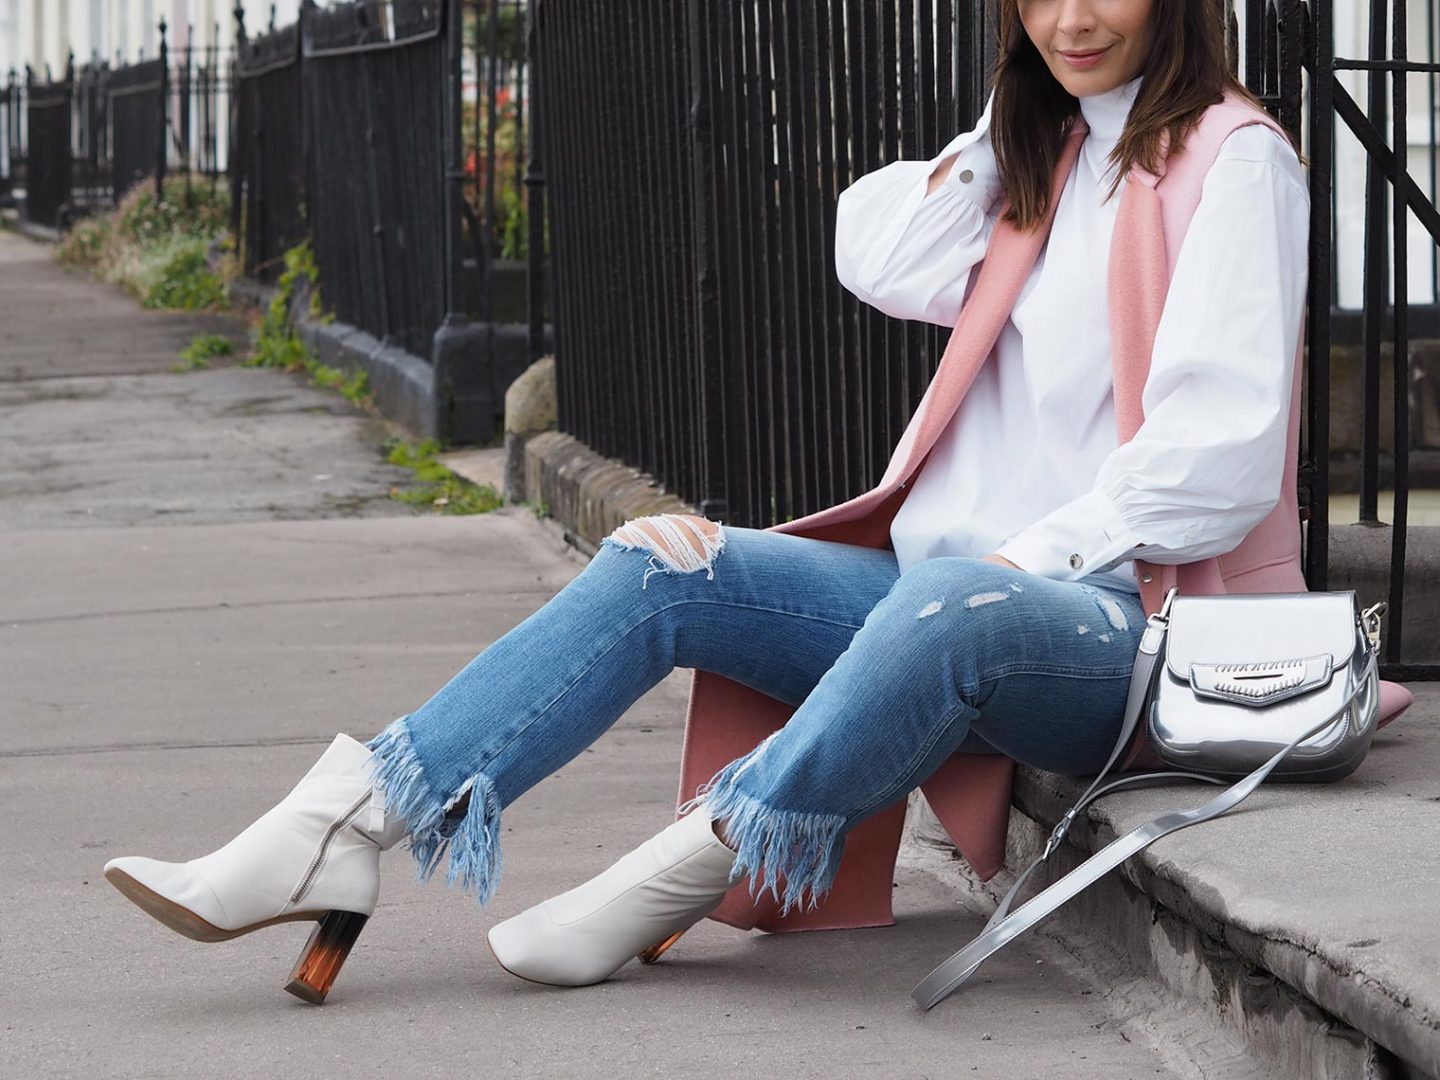 Here are the best boots trends you should pay attention to this season